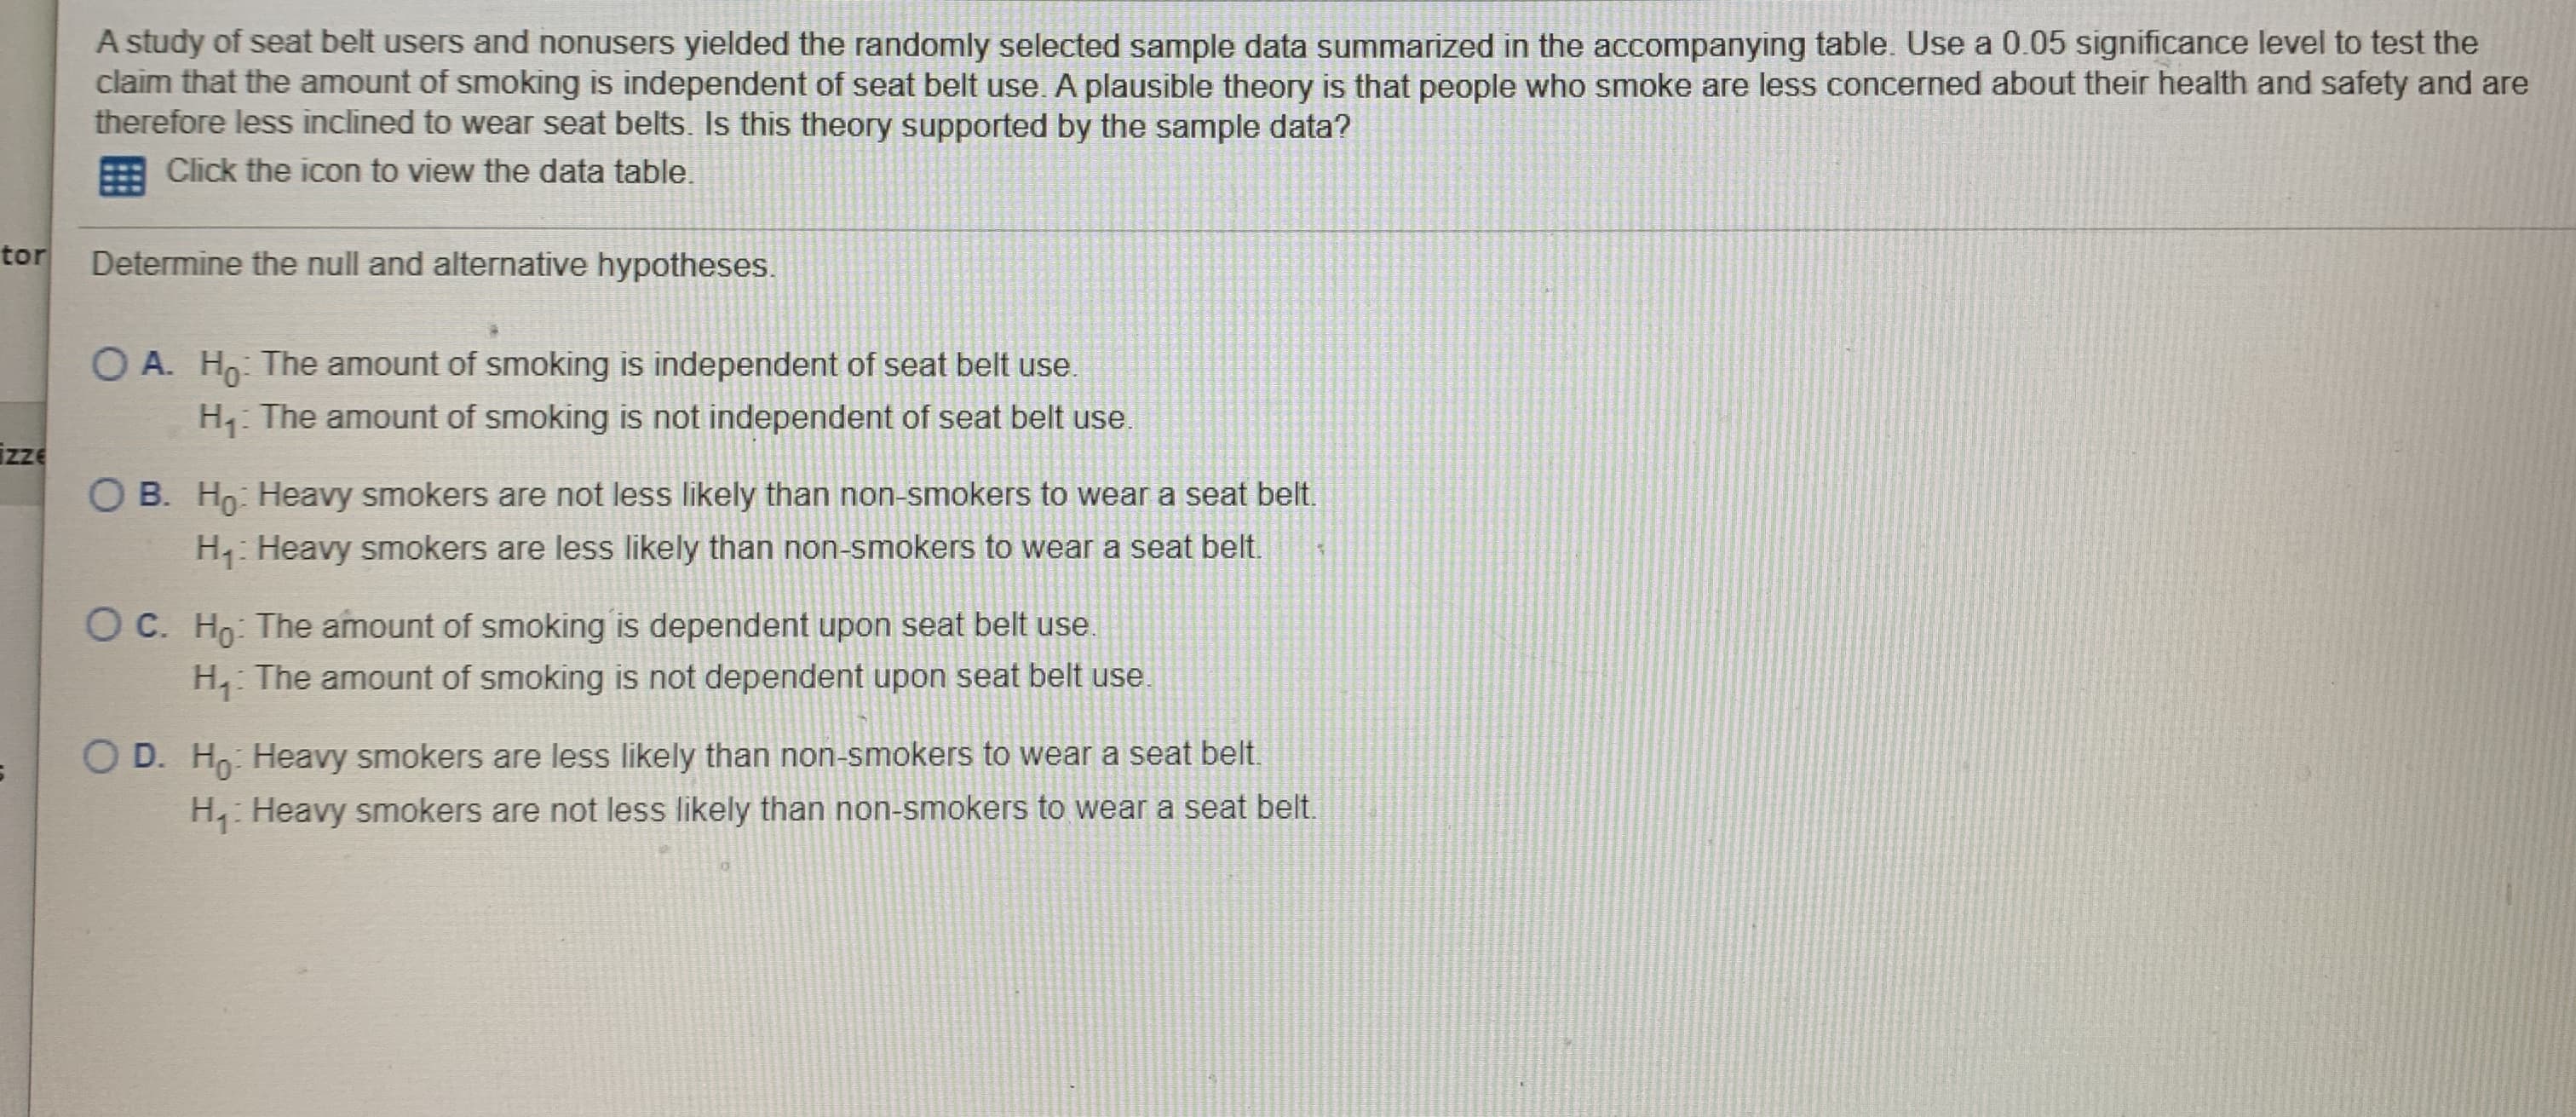 A study of seat belt users and nonusers yielded the randomly selected sample data summarized in the accompanying table. Use a 0.05 significance level to test the
claim that the amount of smoking is independent of seat belt use. A plausible theory is that people who smoke are less concerned about their health and safety and are
therefore less inclined to wear seat belts. Is this theory supported by the sample data?
Click the icon to view the data table.
tor
Determine the null and alternative hypotheses.
O A. Ho: The amount of smoking is independent of seat belt use.
H The amount of smoking is not independent of seat belt use.
izze
O B. Ho: Heavy smokers are not less likely than non-smokers to wear a seat belt.
H: Heavy smokers are less likely than non-smokers to wear a seat belt.
O C. Ho: The amount of smoking is dependent upon seat belt use.
H, The amount of smoking is not dependent upon seat belt use
O D. Ho: Heavy smokers are less likely than non-smokers to wear a seat belt.
H, Heavy smokers are not less likely than non-smokers to wear a seat belt.
